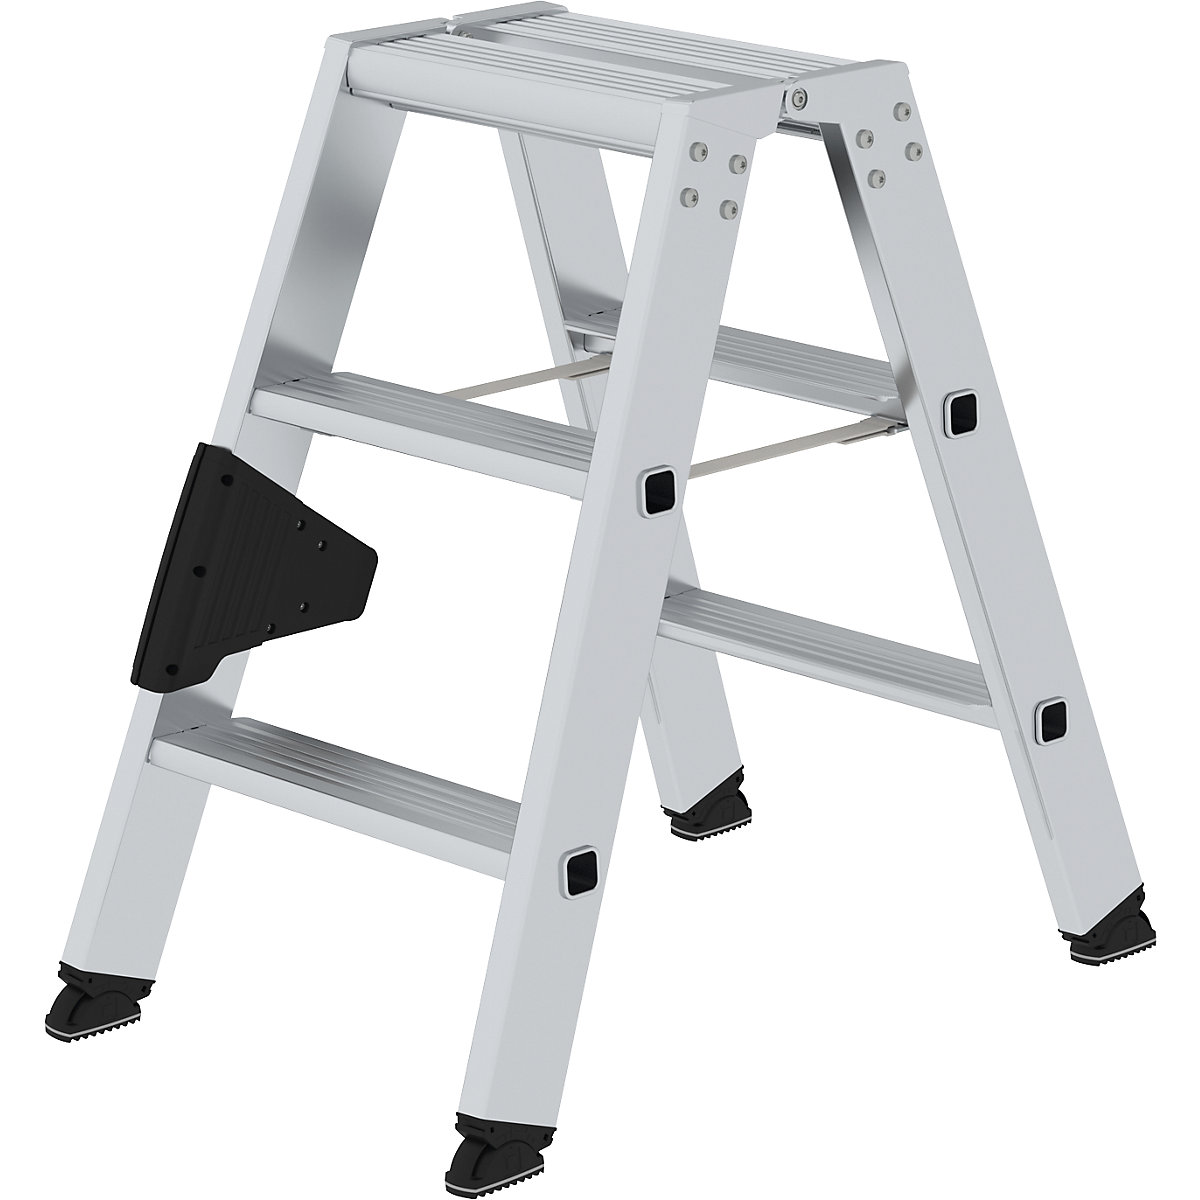 Step ladder, double sided – MUNK